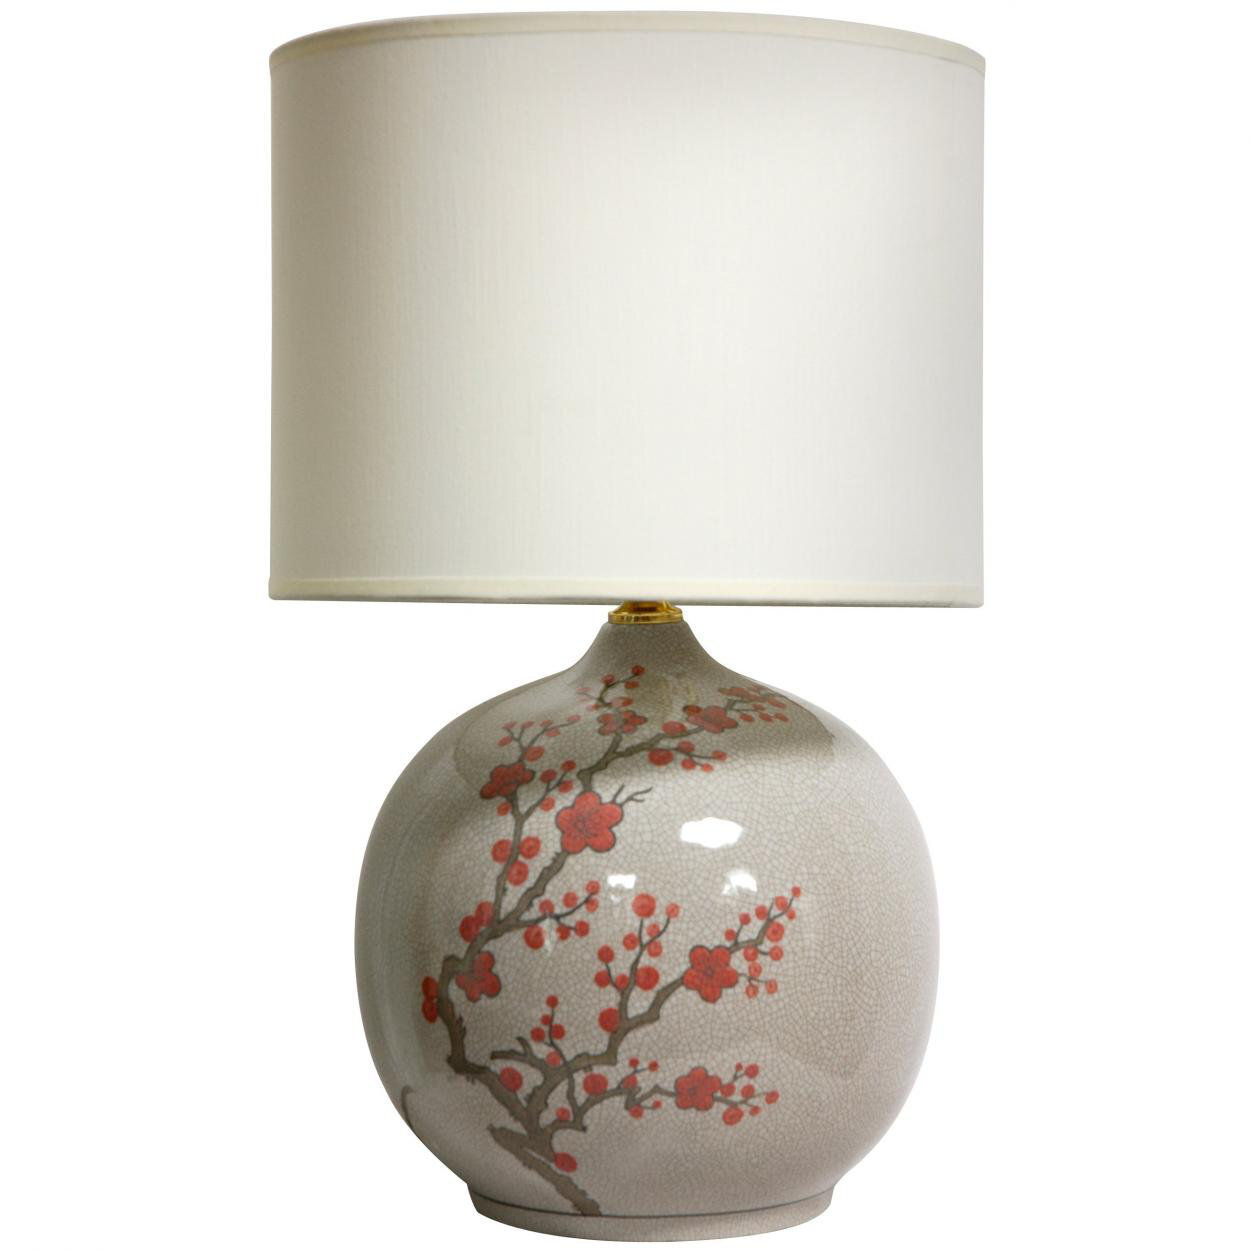 Discreet Neutral Antique Chinese Lamp